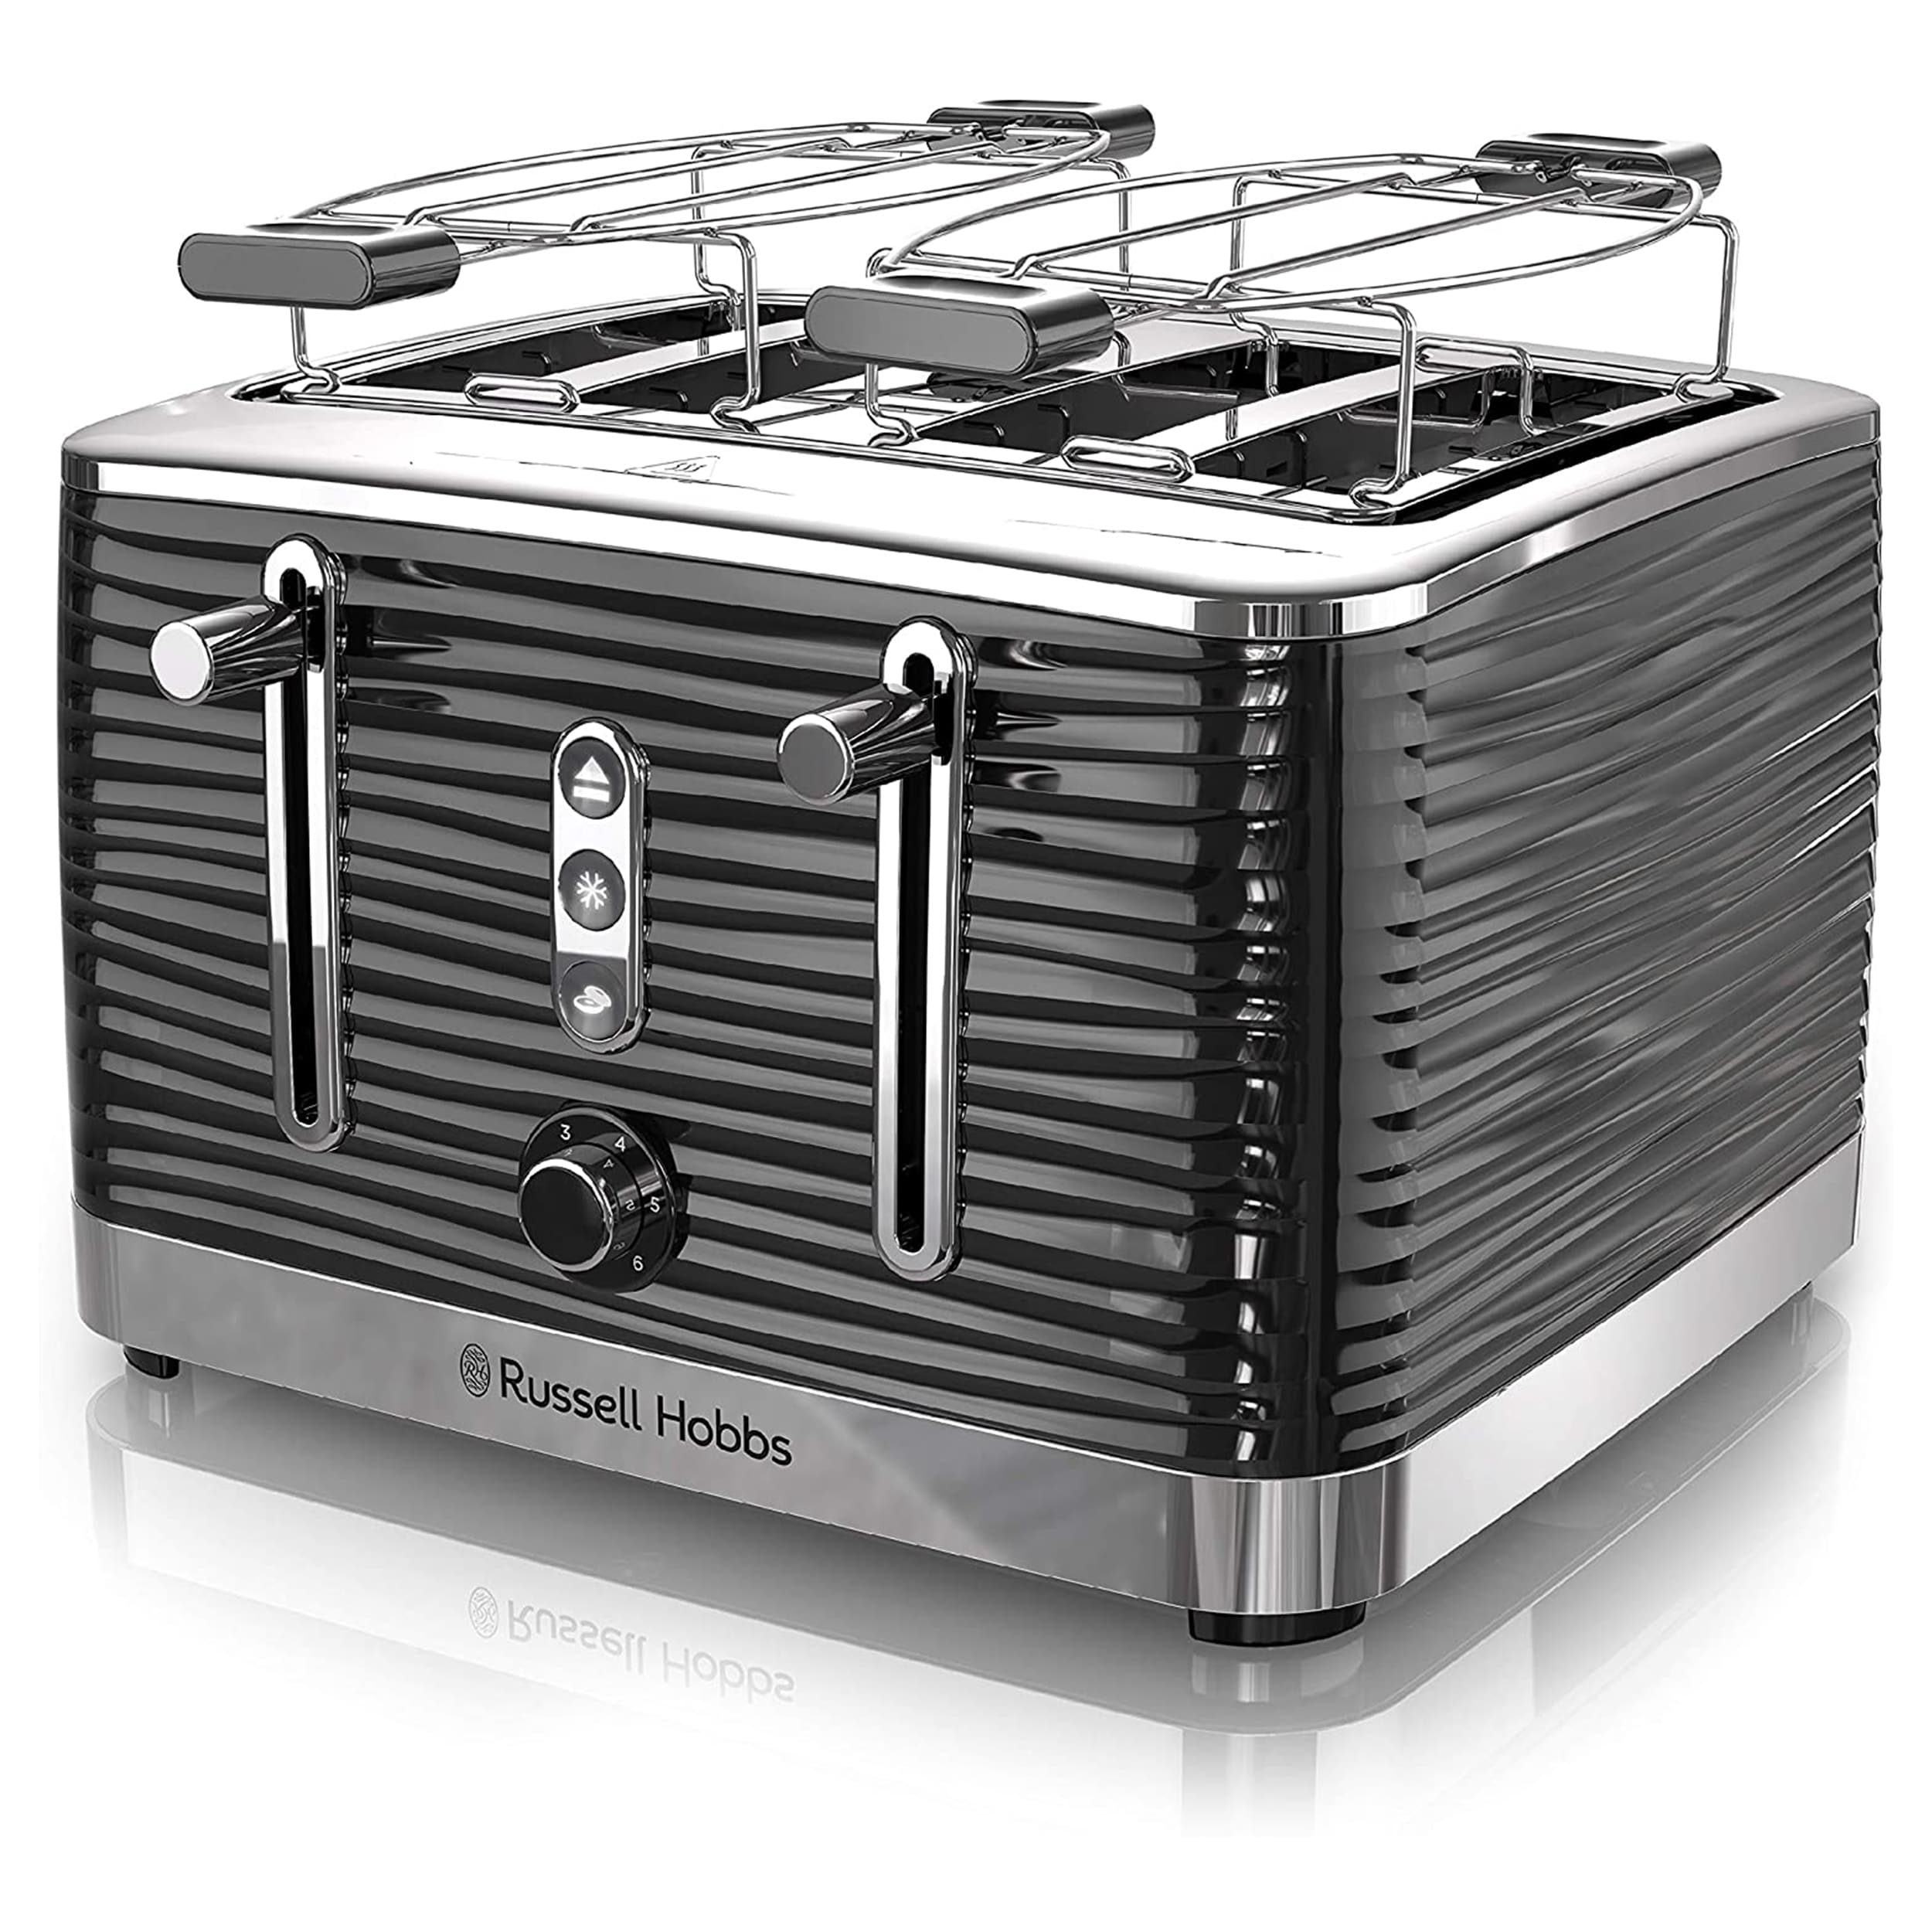 https://ak1.ostkcdn.com/images/products/is/images/direct/08a72cdd7243731a65a06f20acc21f8a8817e33f/Russell-Hobbs-Retro-Style-4-Slice-Toaster-in-Black.jpg